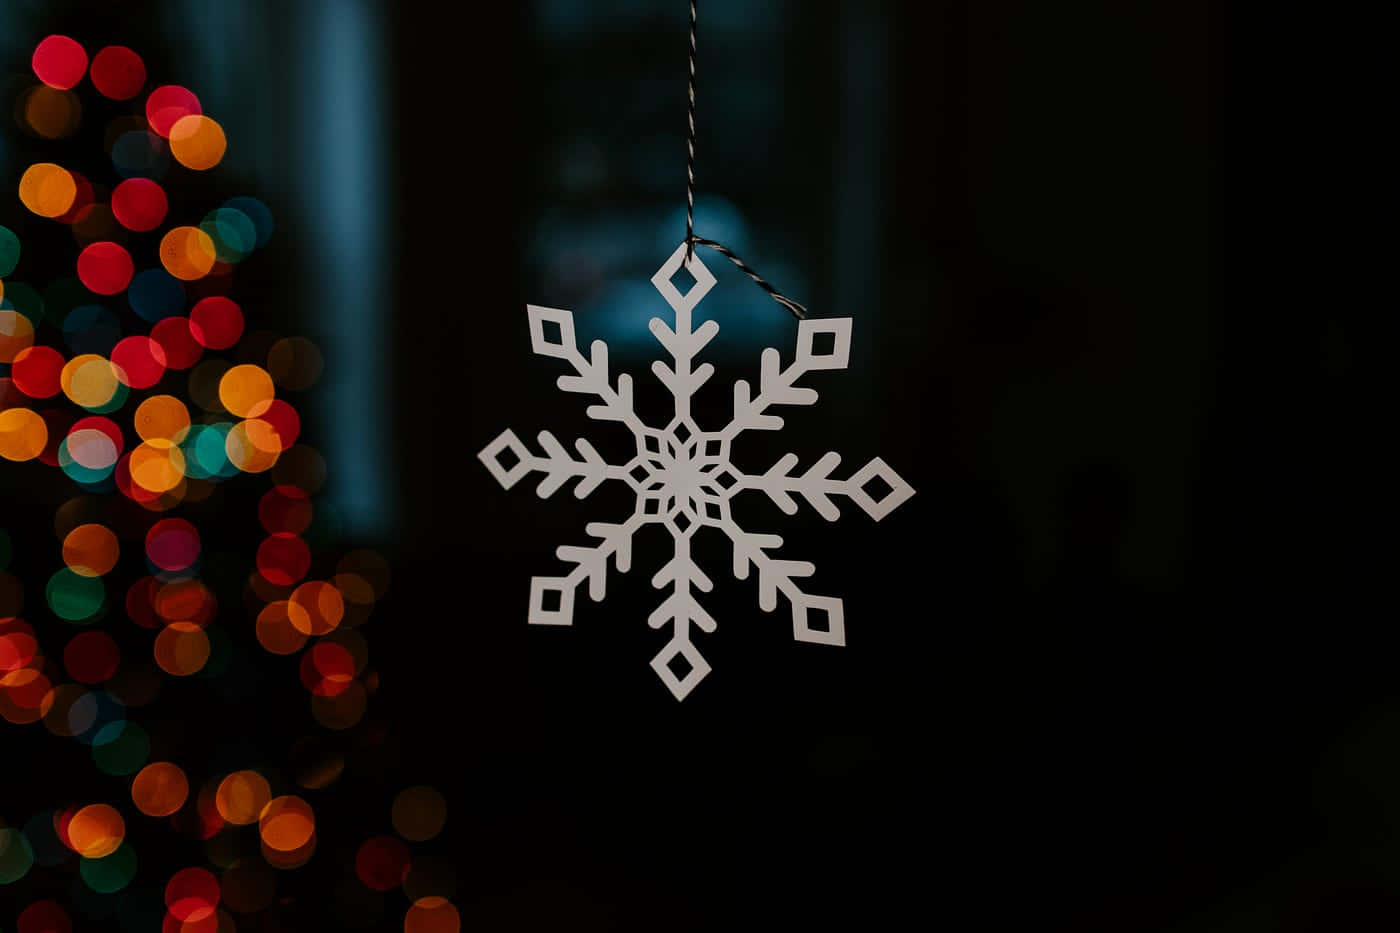 A beautiful and intricate snowflake